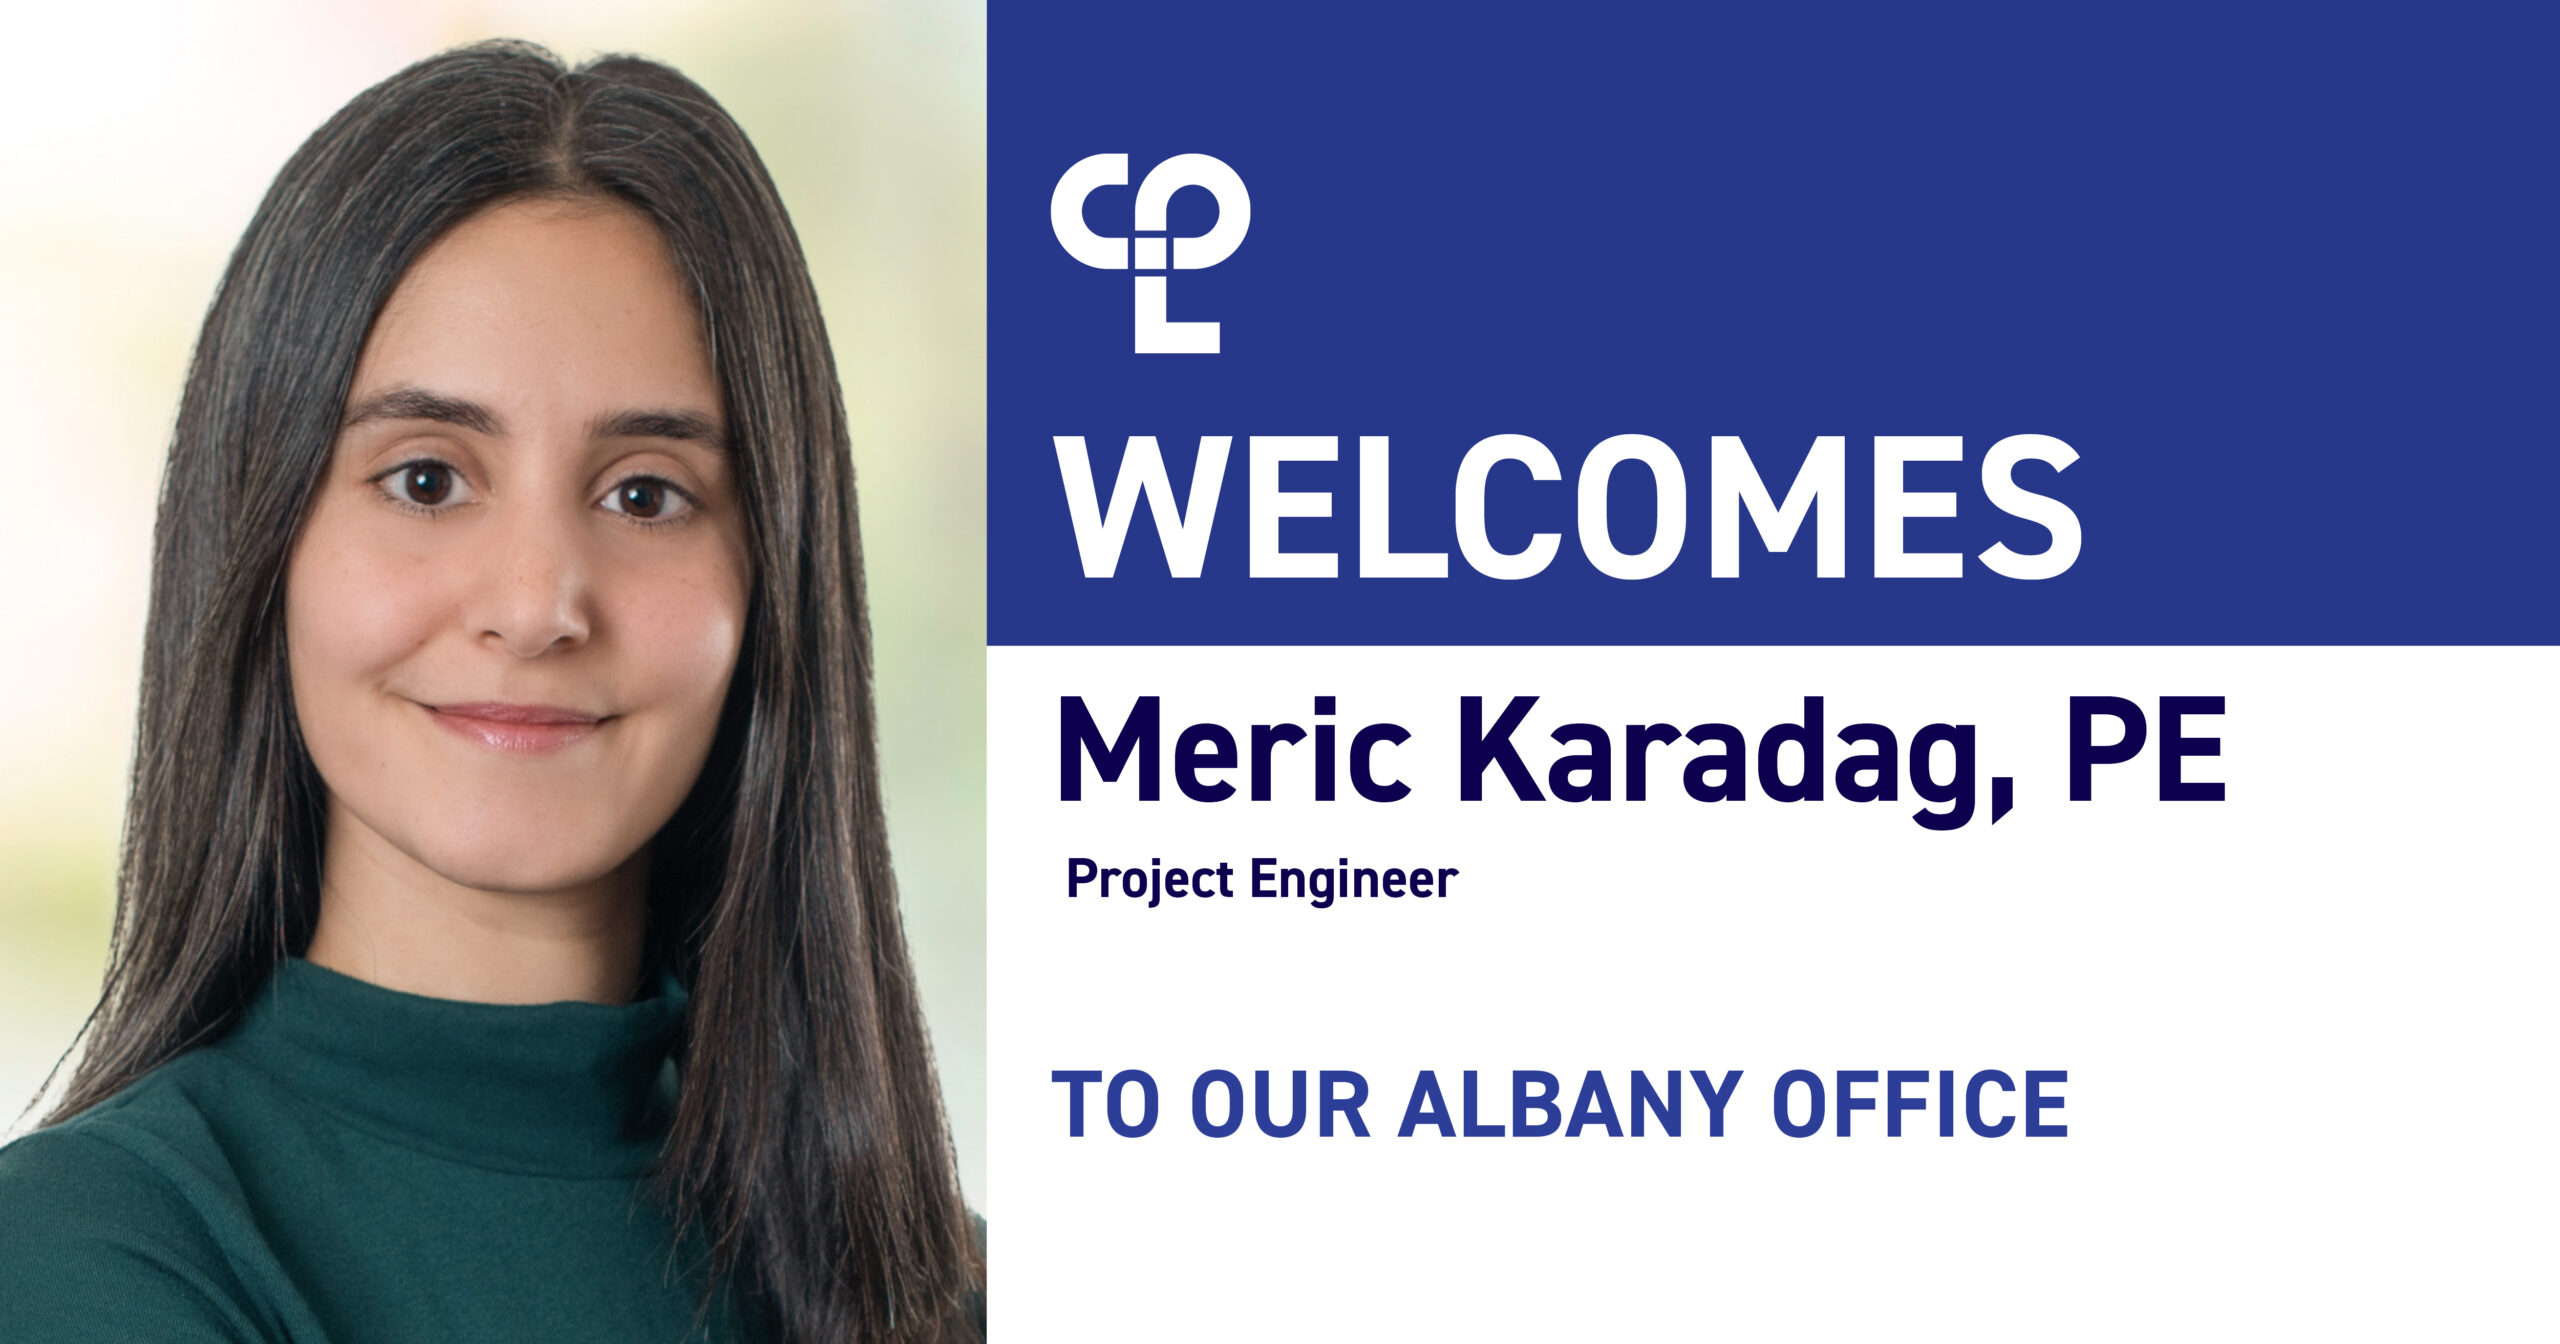 A woman in a green turtleneck with straight dark brown hair smiles next to text that reads "CPL Welcomes Meric Karadag, PE, Project Engineer, to our Albany Office"